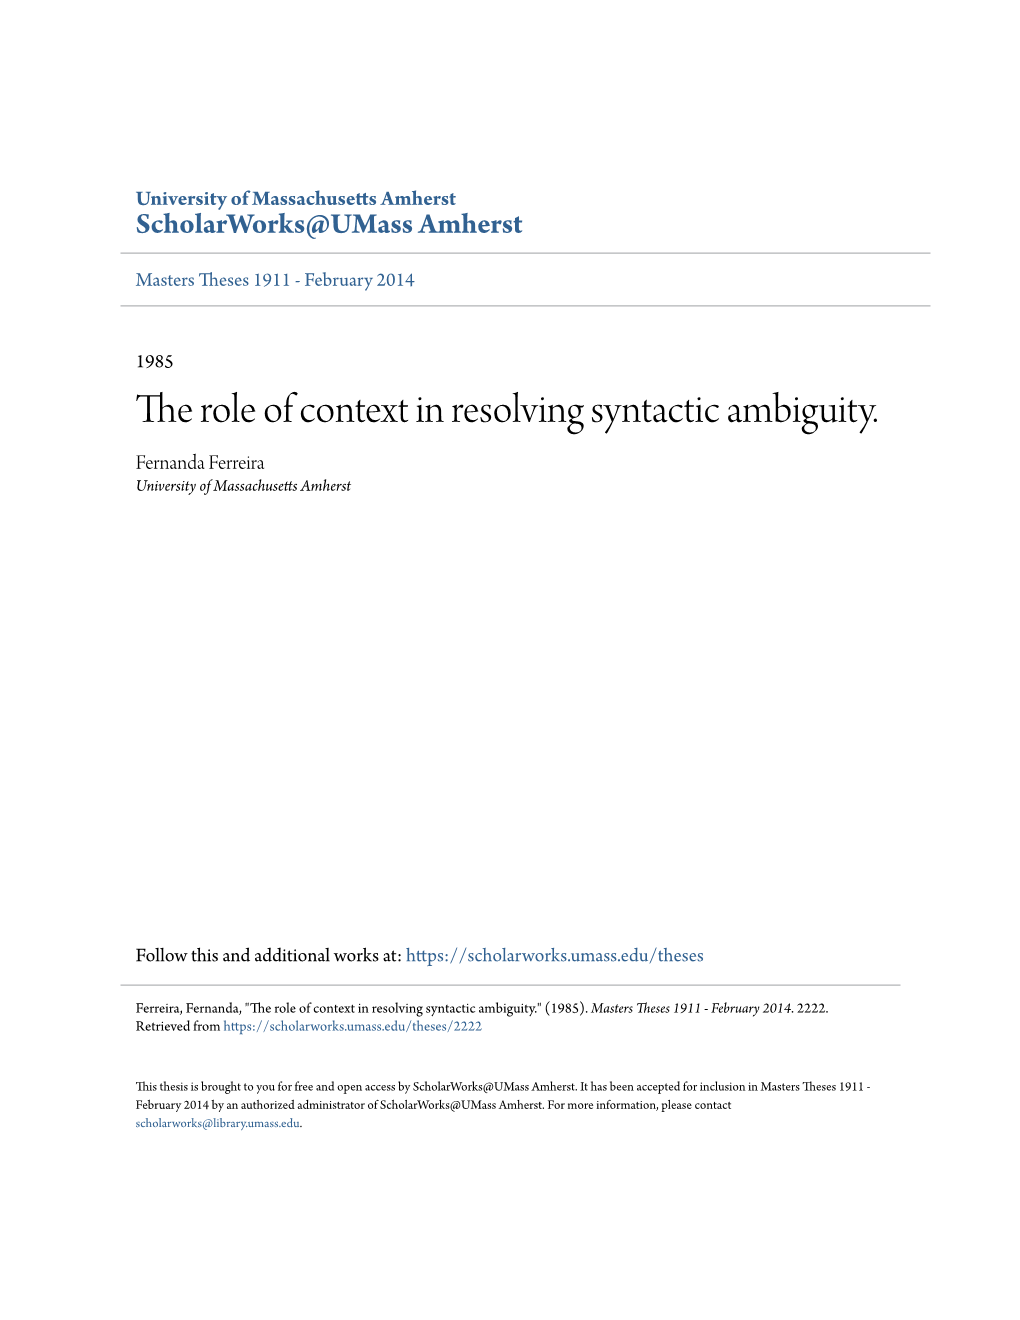 The Role of Context in Resolving Syntactic Ambiguity